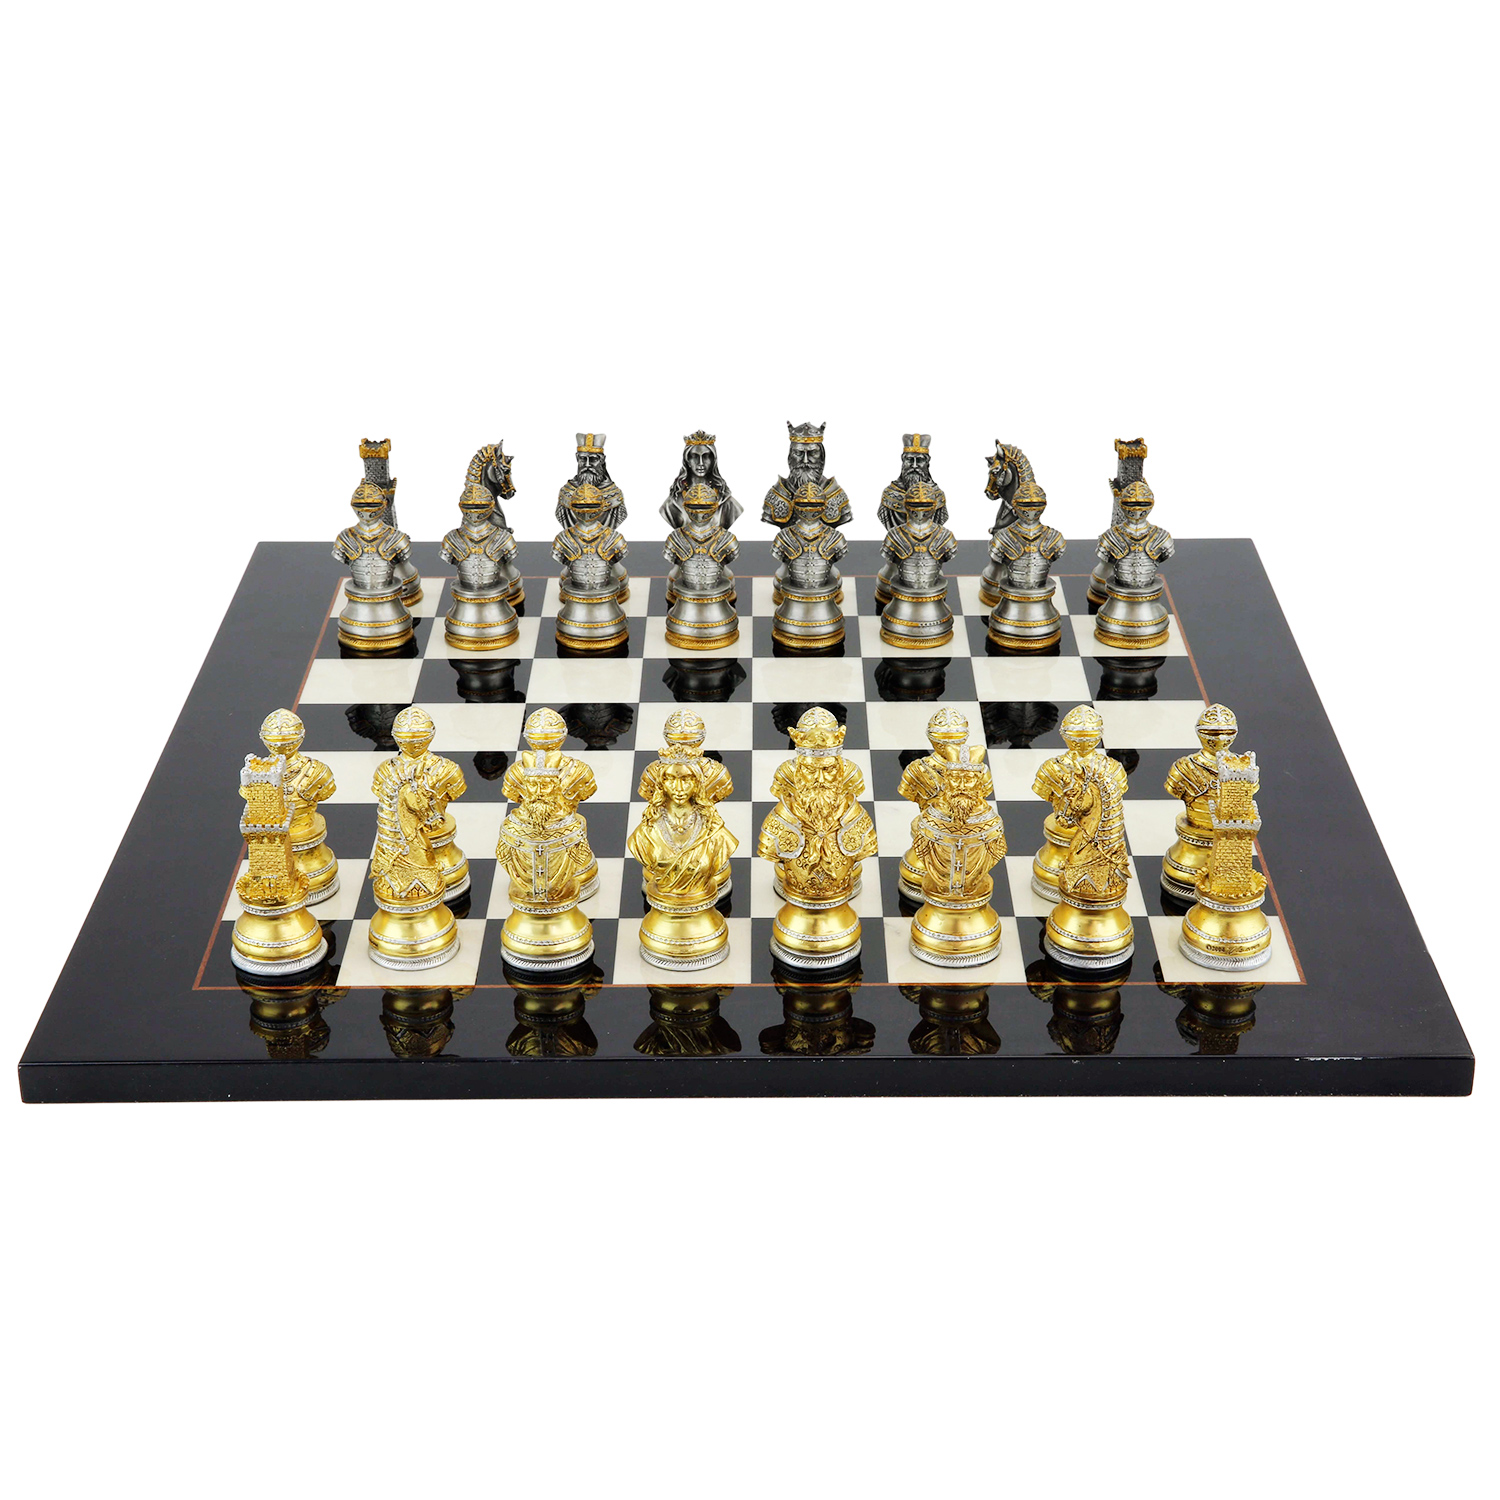 British Metal Chess Pieces With Ceramic Chess Board On Handmade Wood, Chess  Set